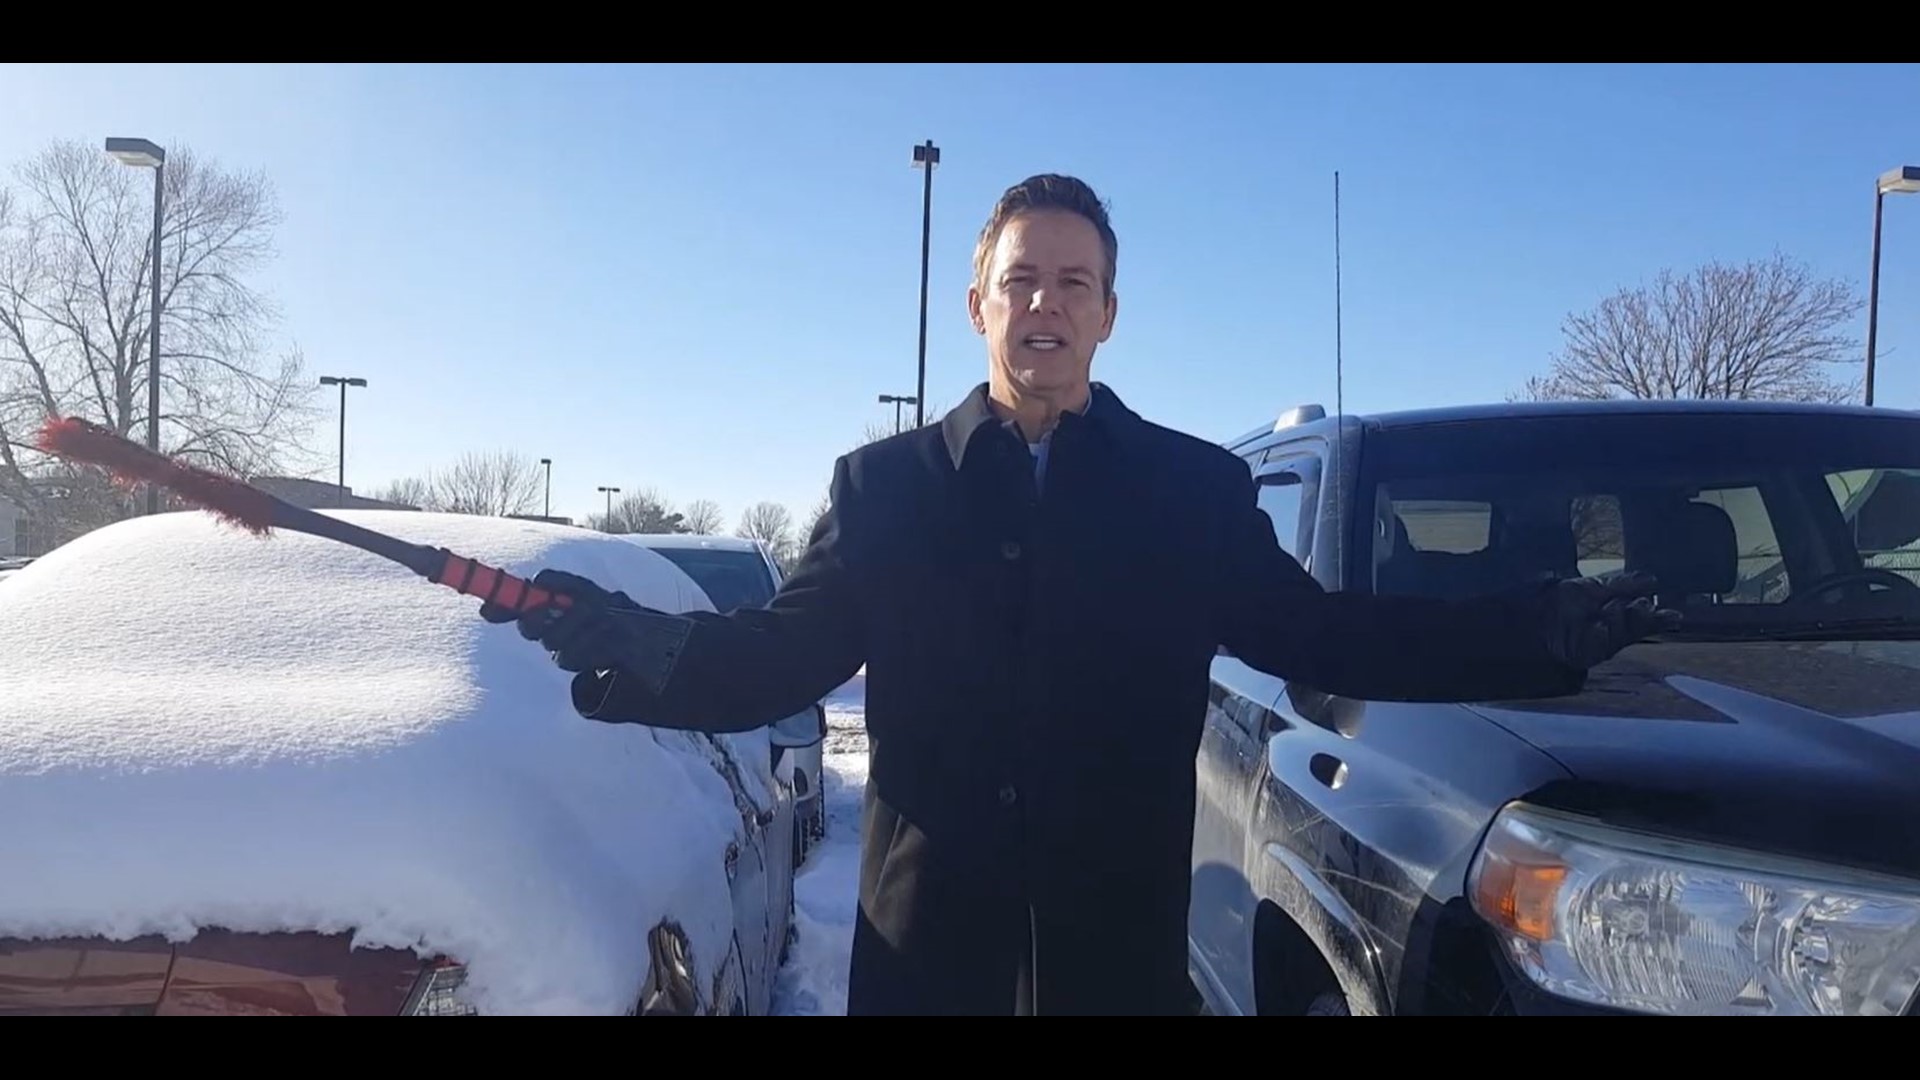 Can you drive a snow-covered car in Iowa?